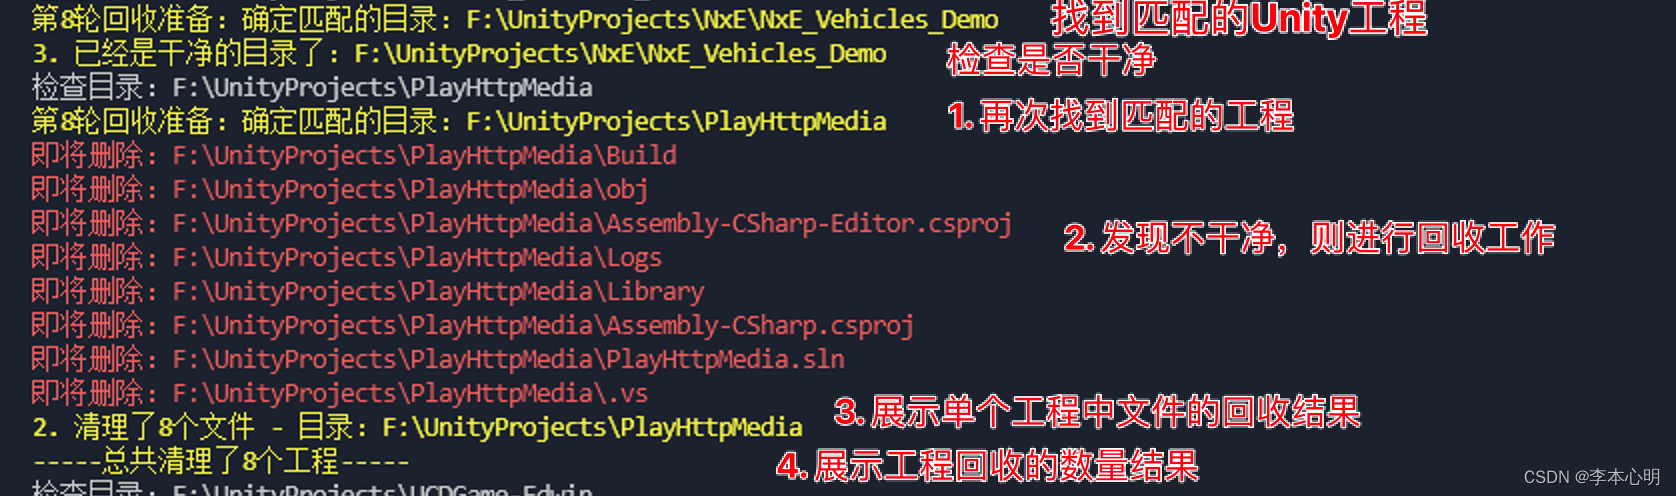 Python<span style='color:red;'>工具</span>-清理<span style='color:red;'>Unity</span>(批量深度)清理U<span style='color:red;'>3</span>D项目<span style='color:red;'>工程</span>保留关键<span style='color:red;'>工程</span>文件